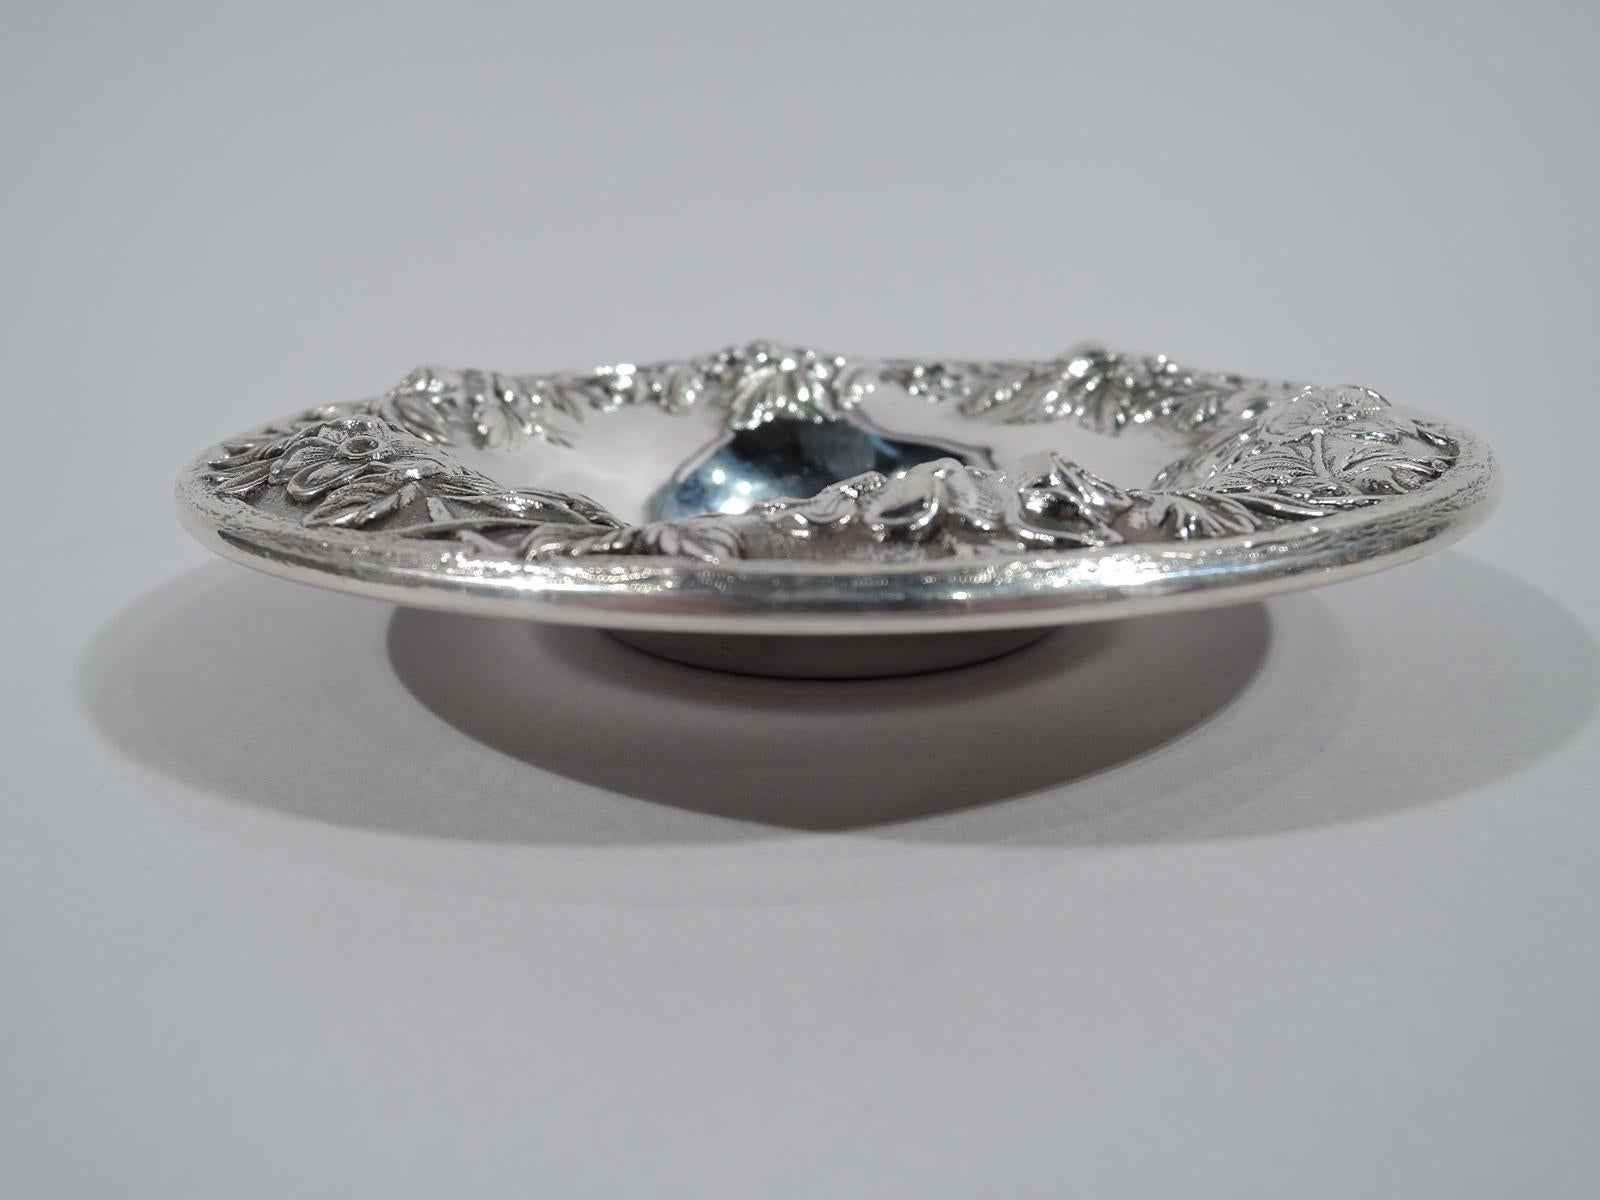 Pretty old-fashioned sterling silver bowl. Made by S. Kirk & Son in Baltimore. Plain deep well and wide mouth with repousse floral border and twig rim. Very sweet. Fully marked including maker’s stamp (1932-61) and no. 13F. Weight: 4 troy ounces.